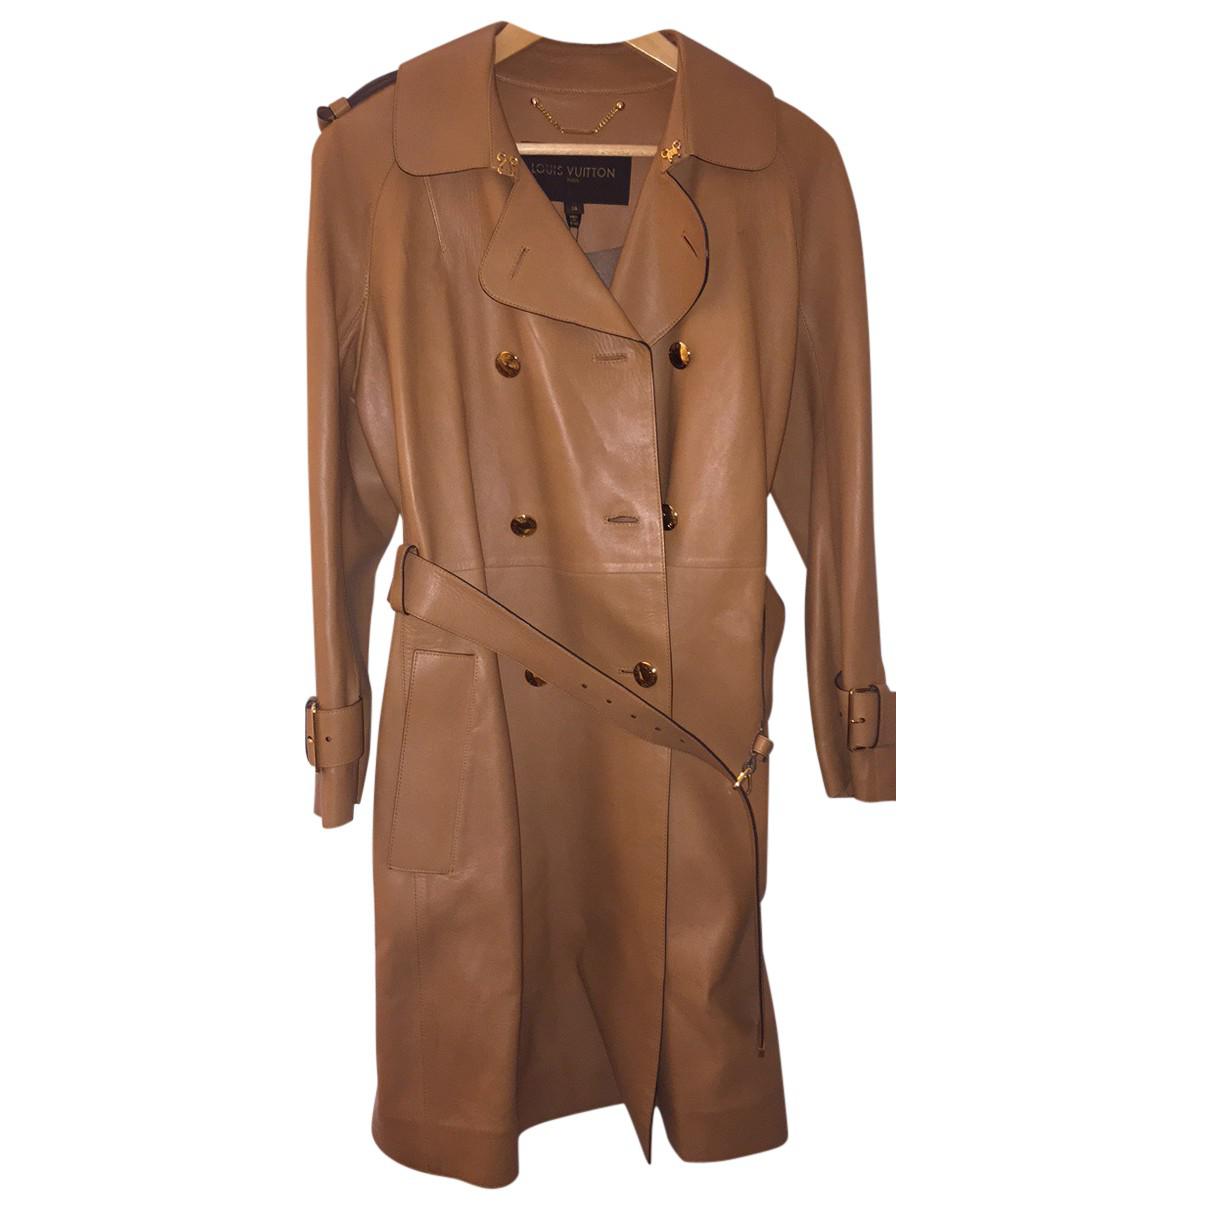 Lyst - Louis Vuitton Pre-owned Camel Leather Trench Coat in Brown